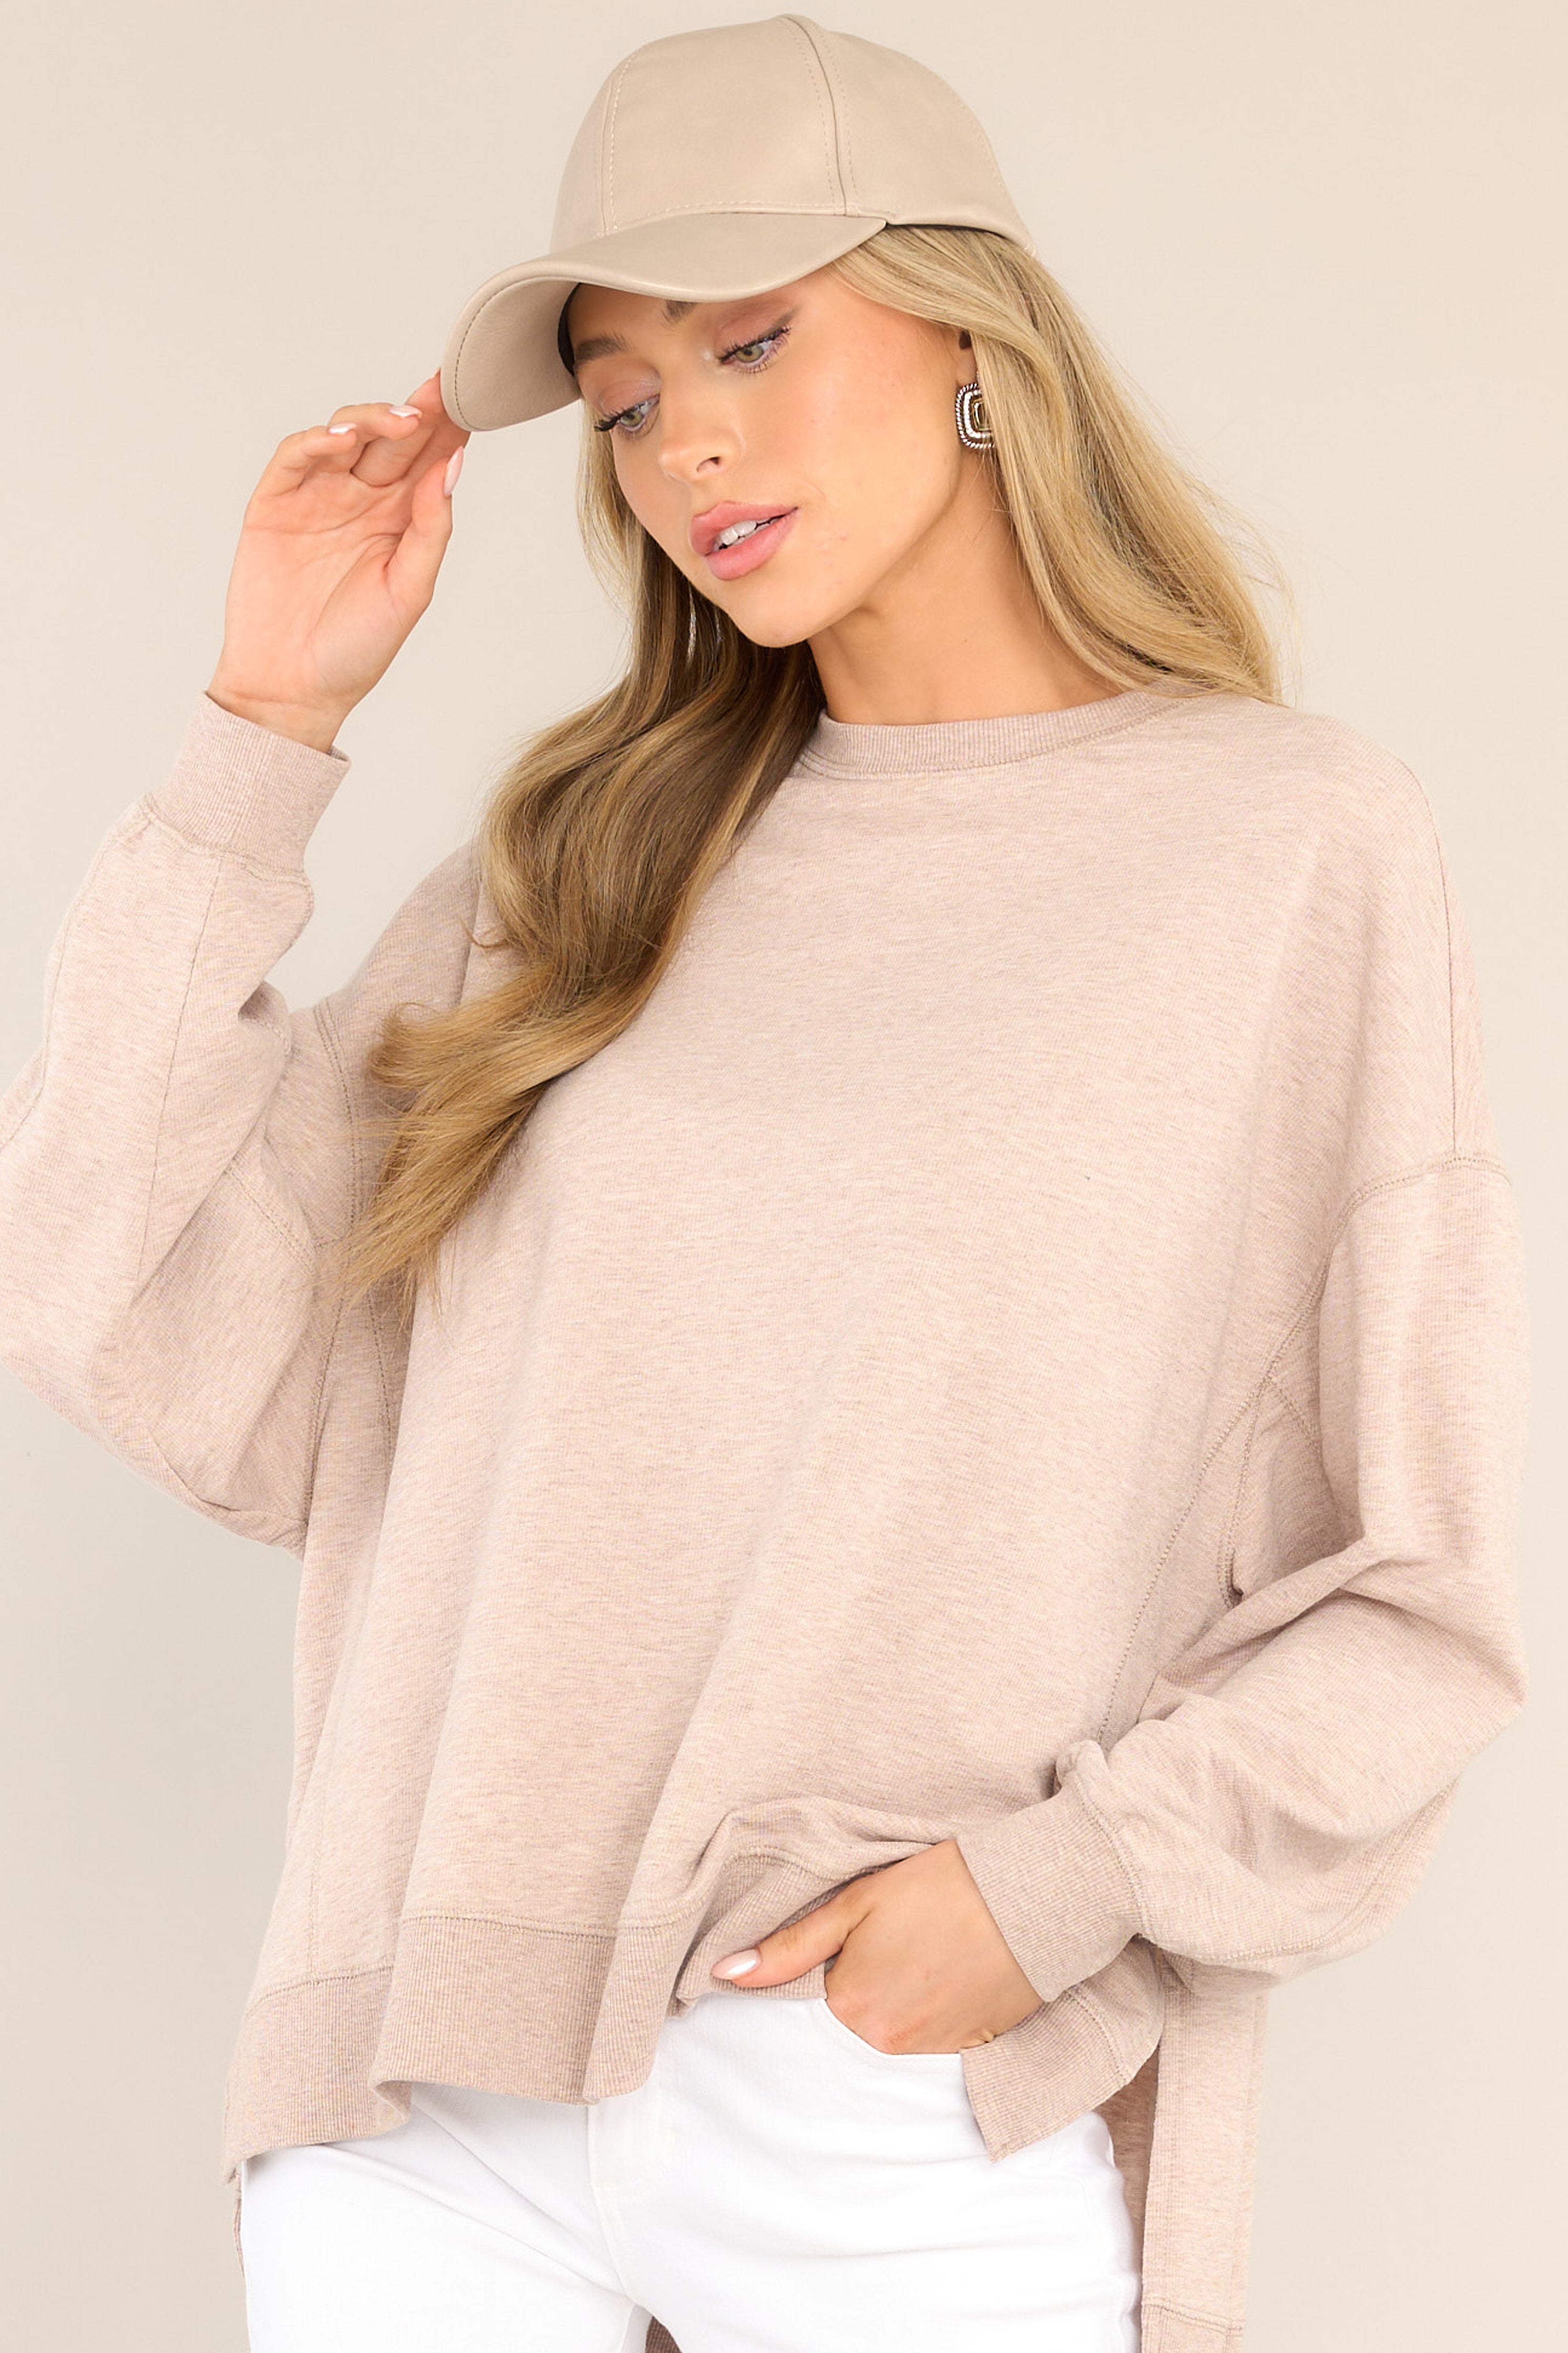 This light brown top features a crew neckline, dropped shoulders, ribbed cuffed sleeves, and a high-low split hemline.